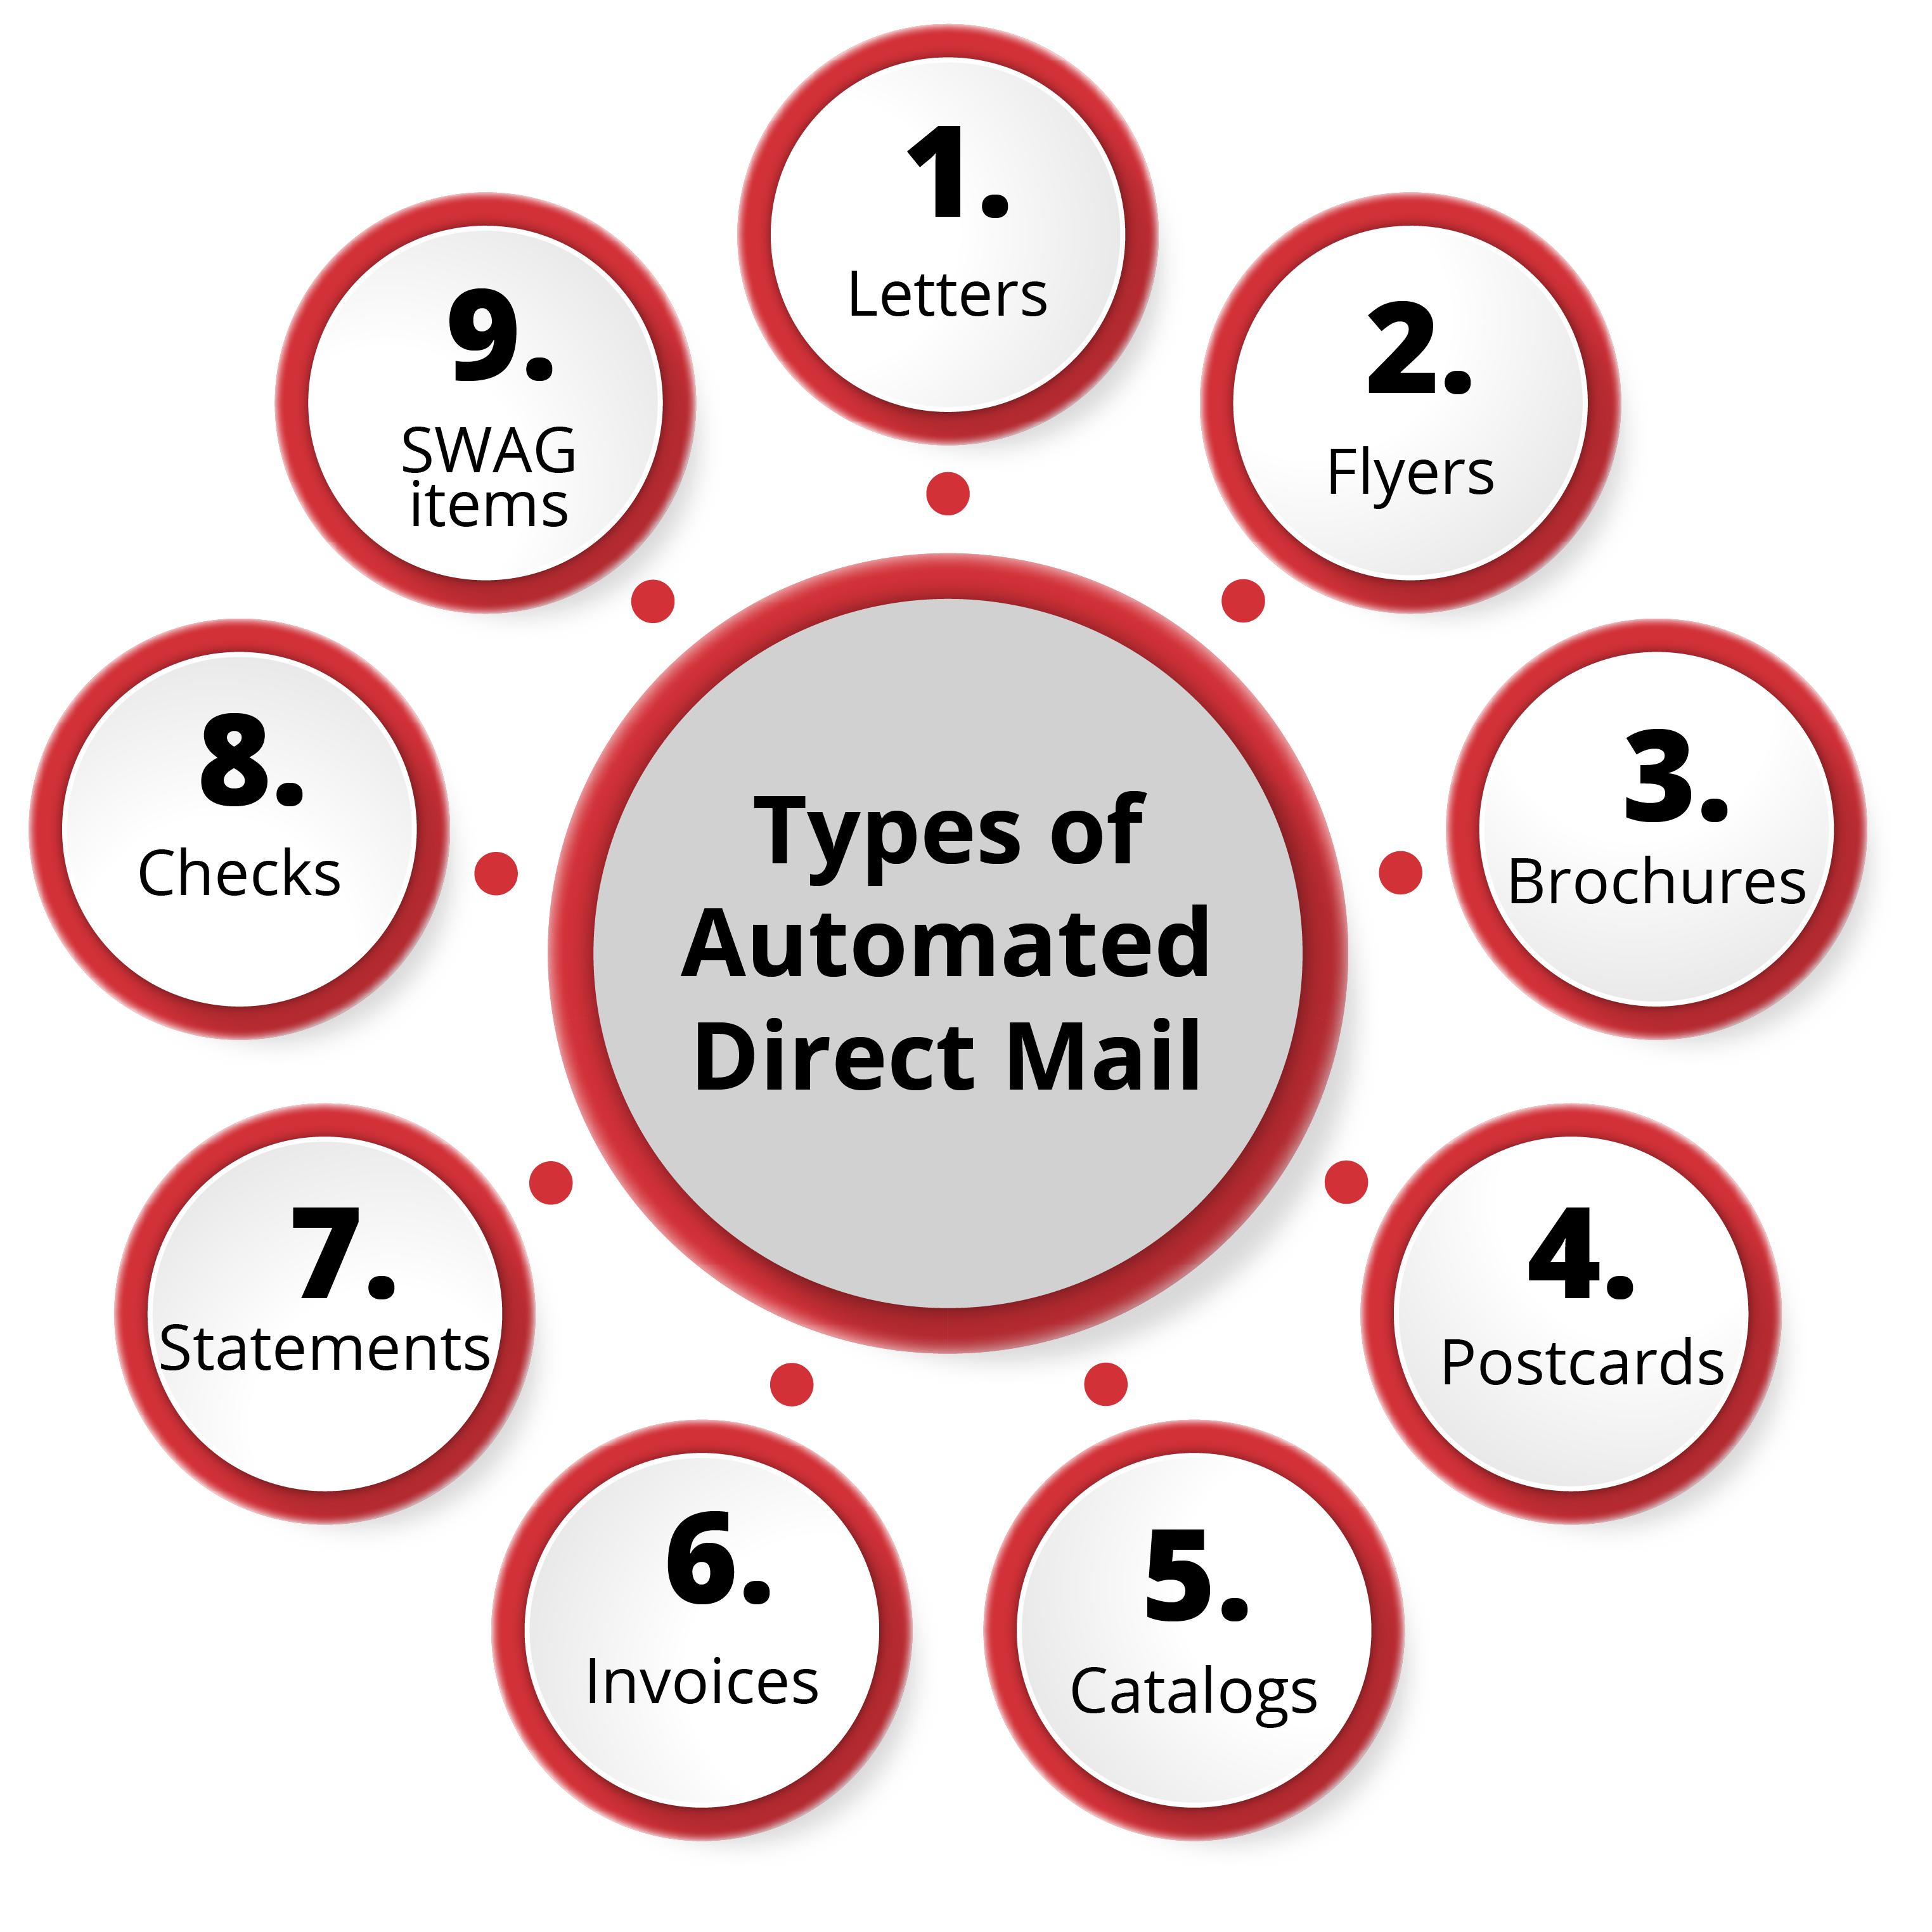 Types of Automated Direct Mail